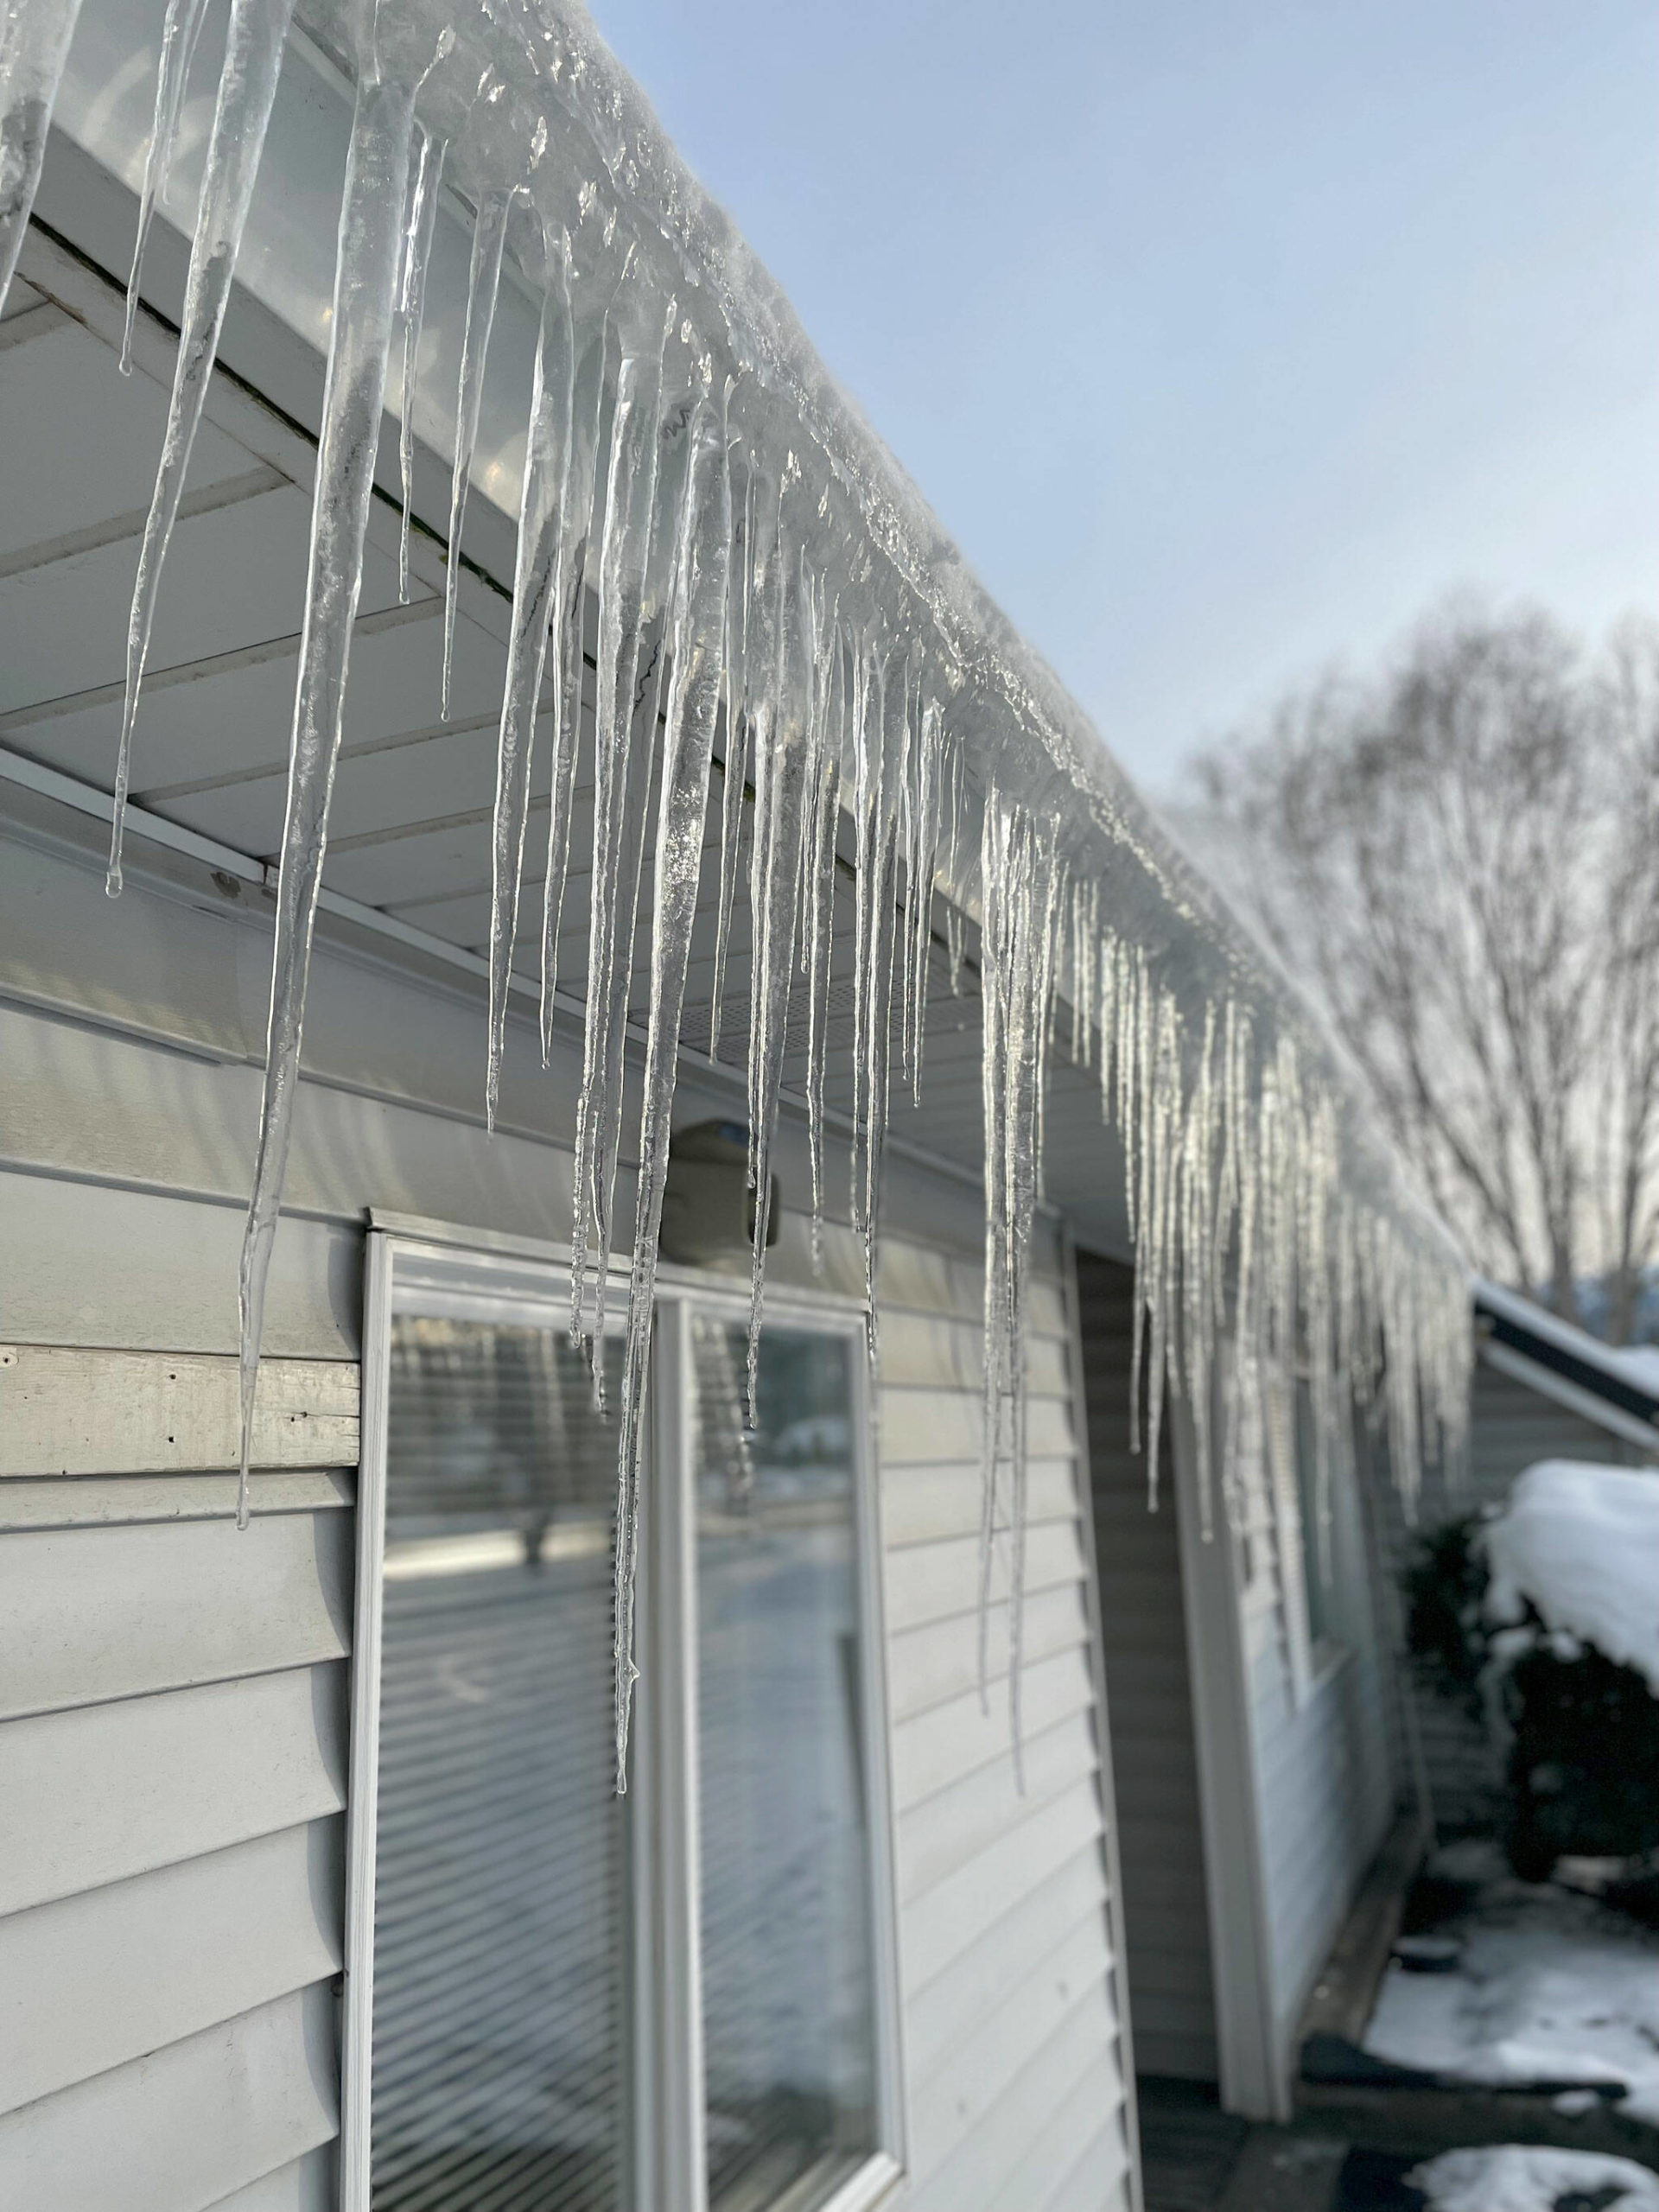 Dozens of icicles dangle from the gutter at DM Disposal/Murrey’s in Carlsborg on Jan. 2. Sequim Gazette photo by Matthew Nash